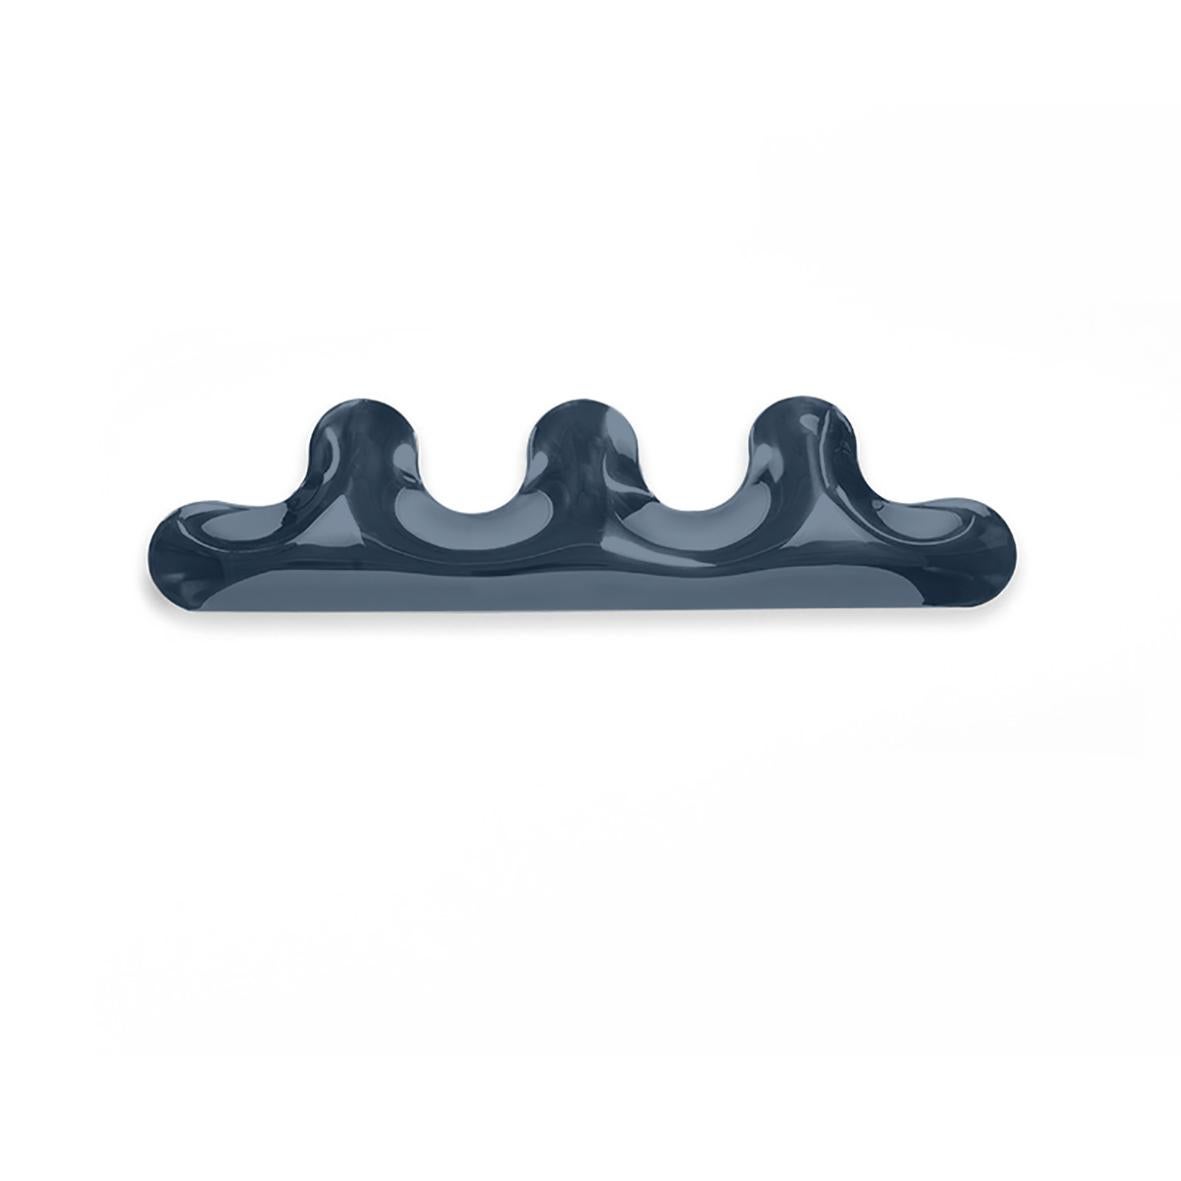 Cosmic Blue Kamm 3 Wall Hanger by Zieta
Dimensions: D 6 x W 51 x H 13 cm 
Material: Stainless steel. 
Finish: Thermal colored.
Available in colors: Beige Grey, Black Glossy, Graphite, Stainless Steel, White Glossy, Flamed Gold, and Cosmic Blue. Also